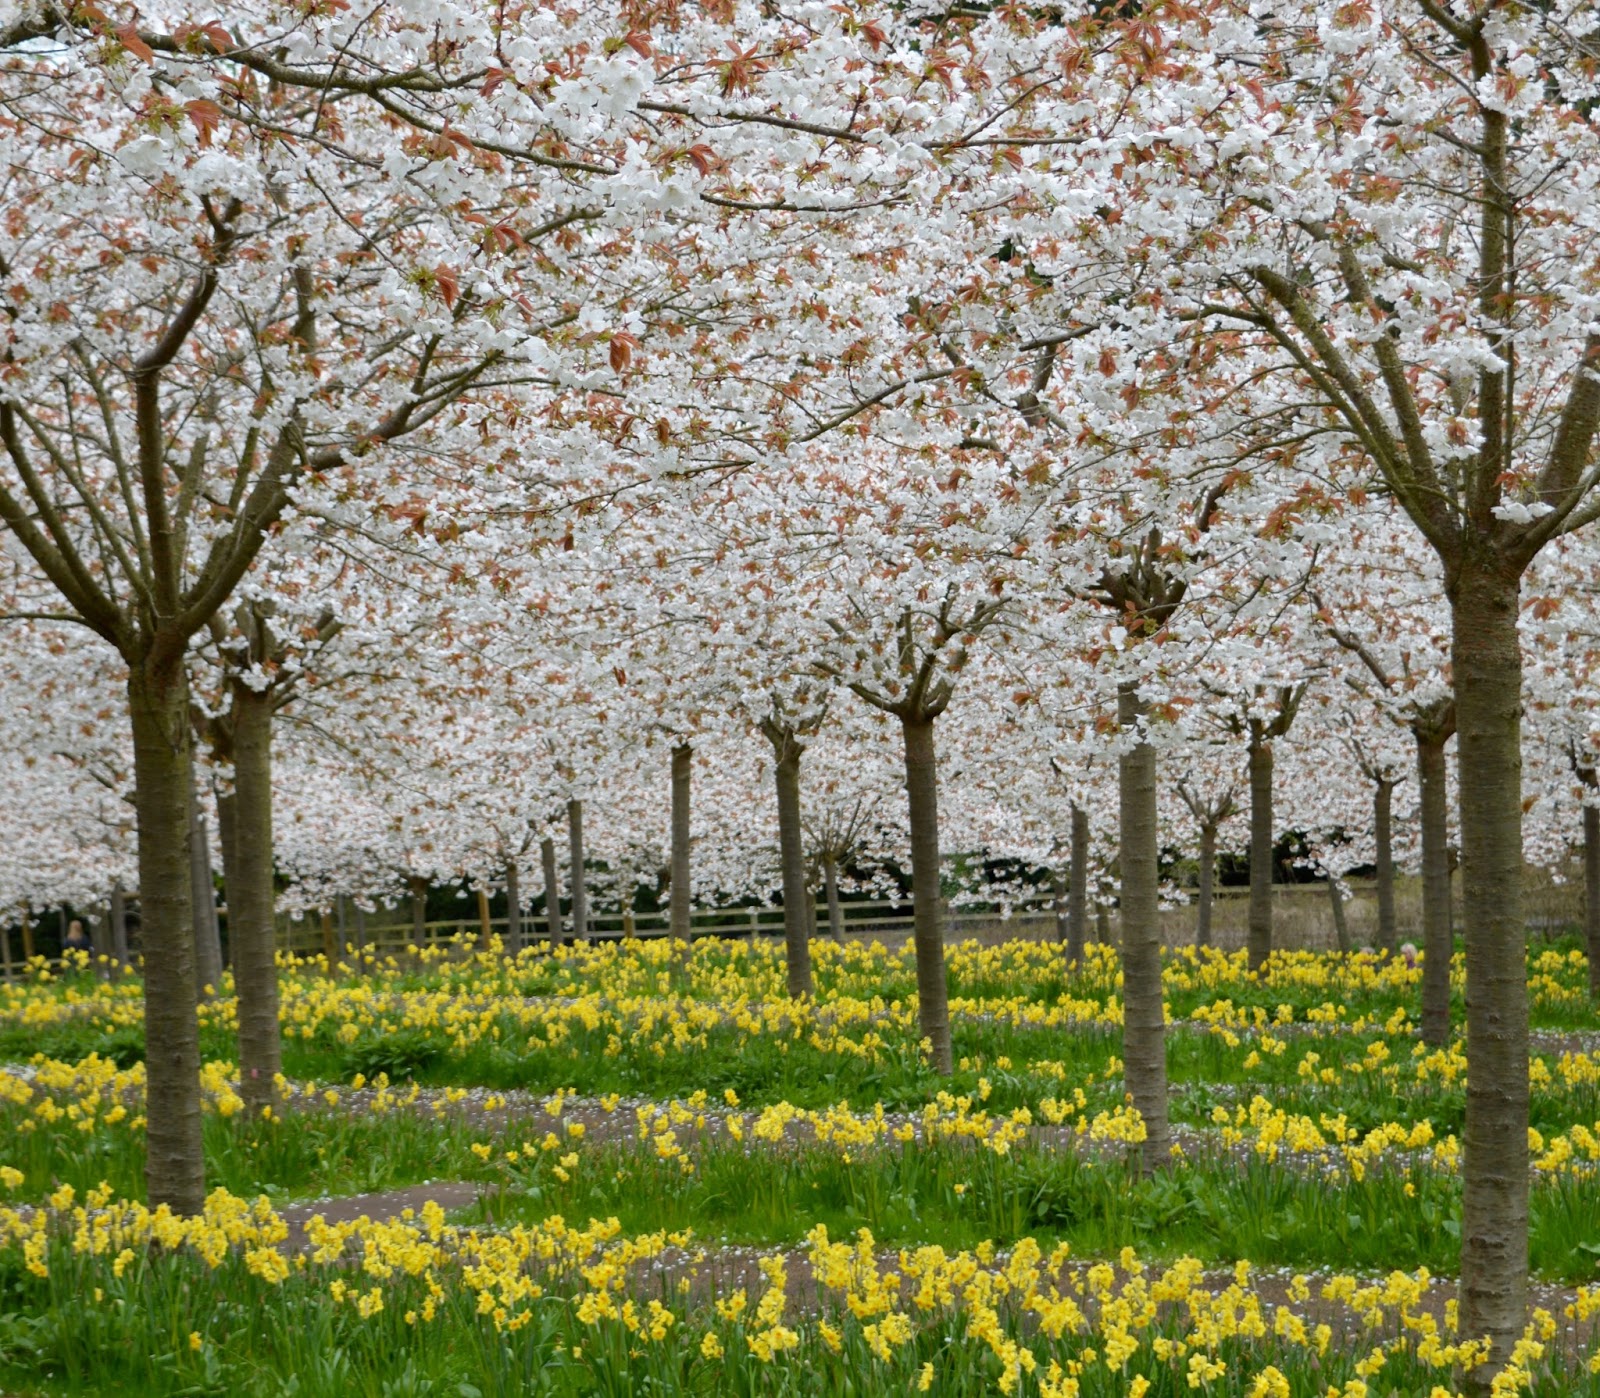 The Cherry Blossom Orchard at The Alnwick Garden